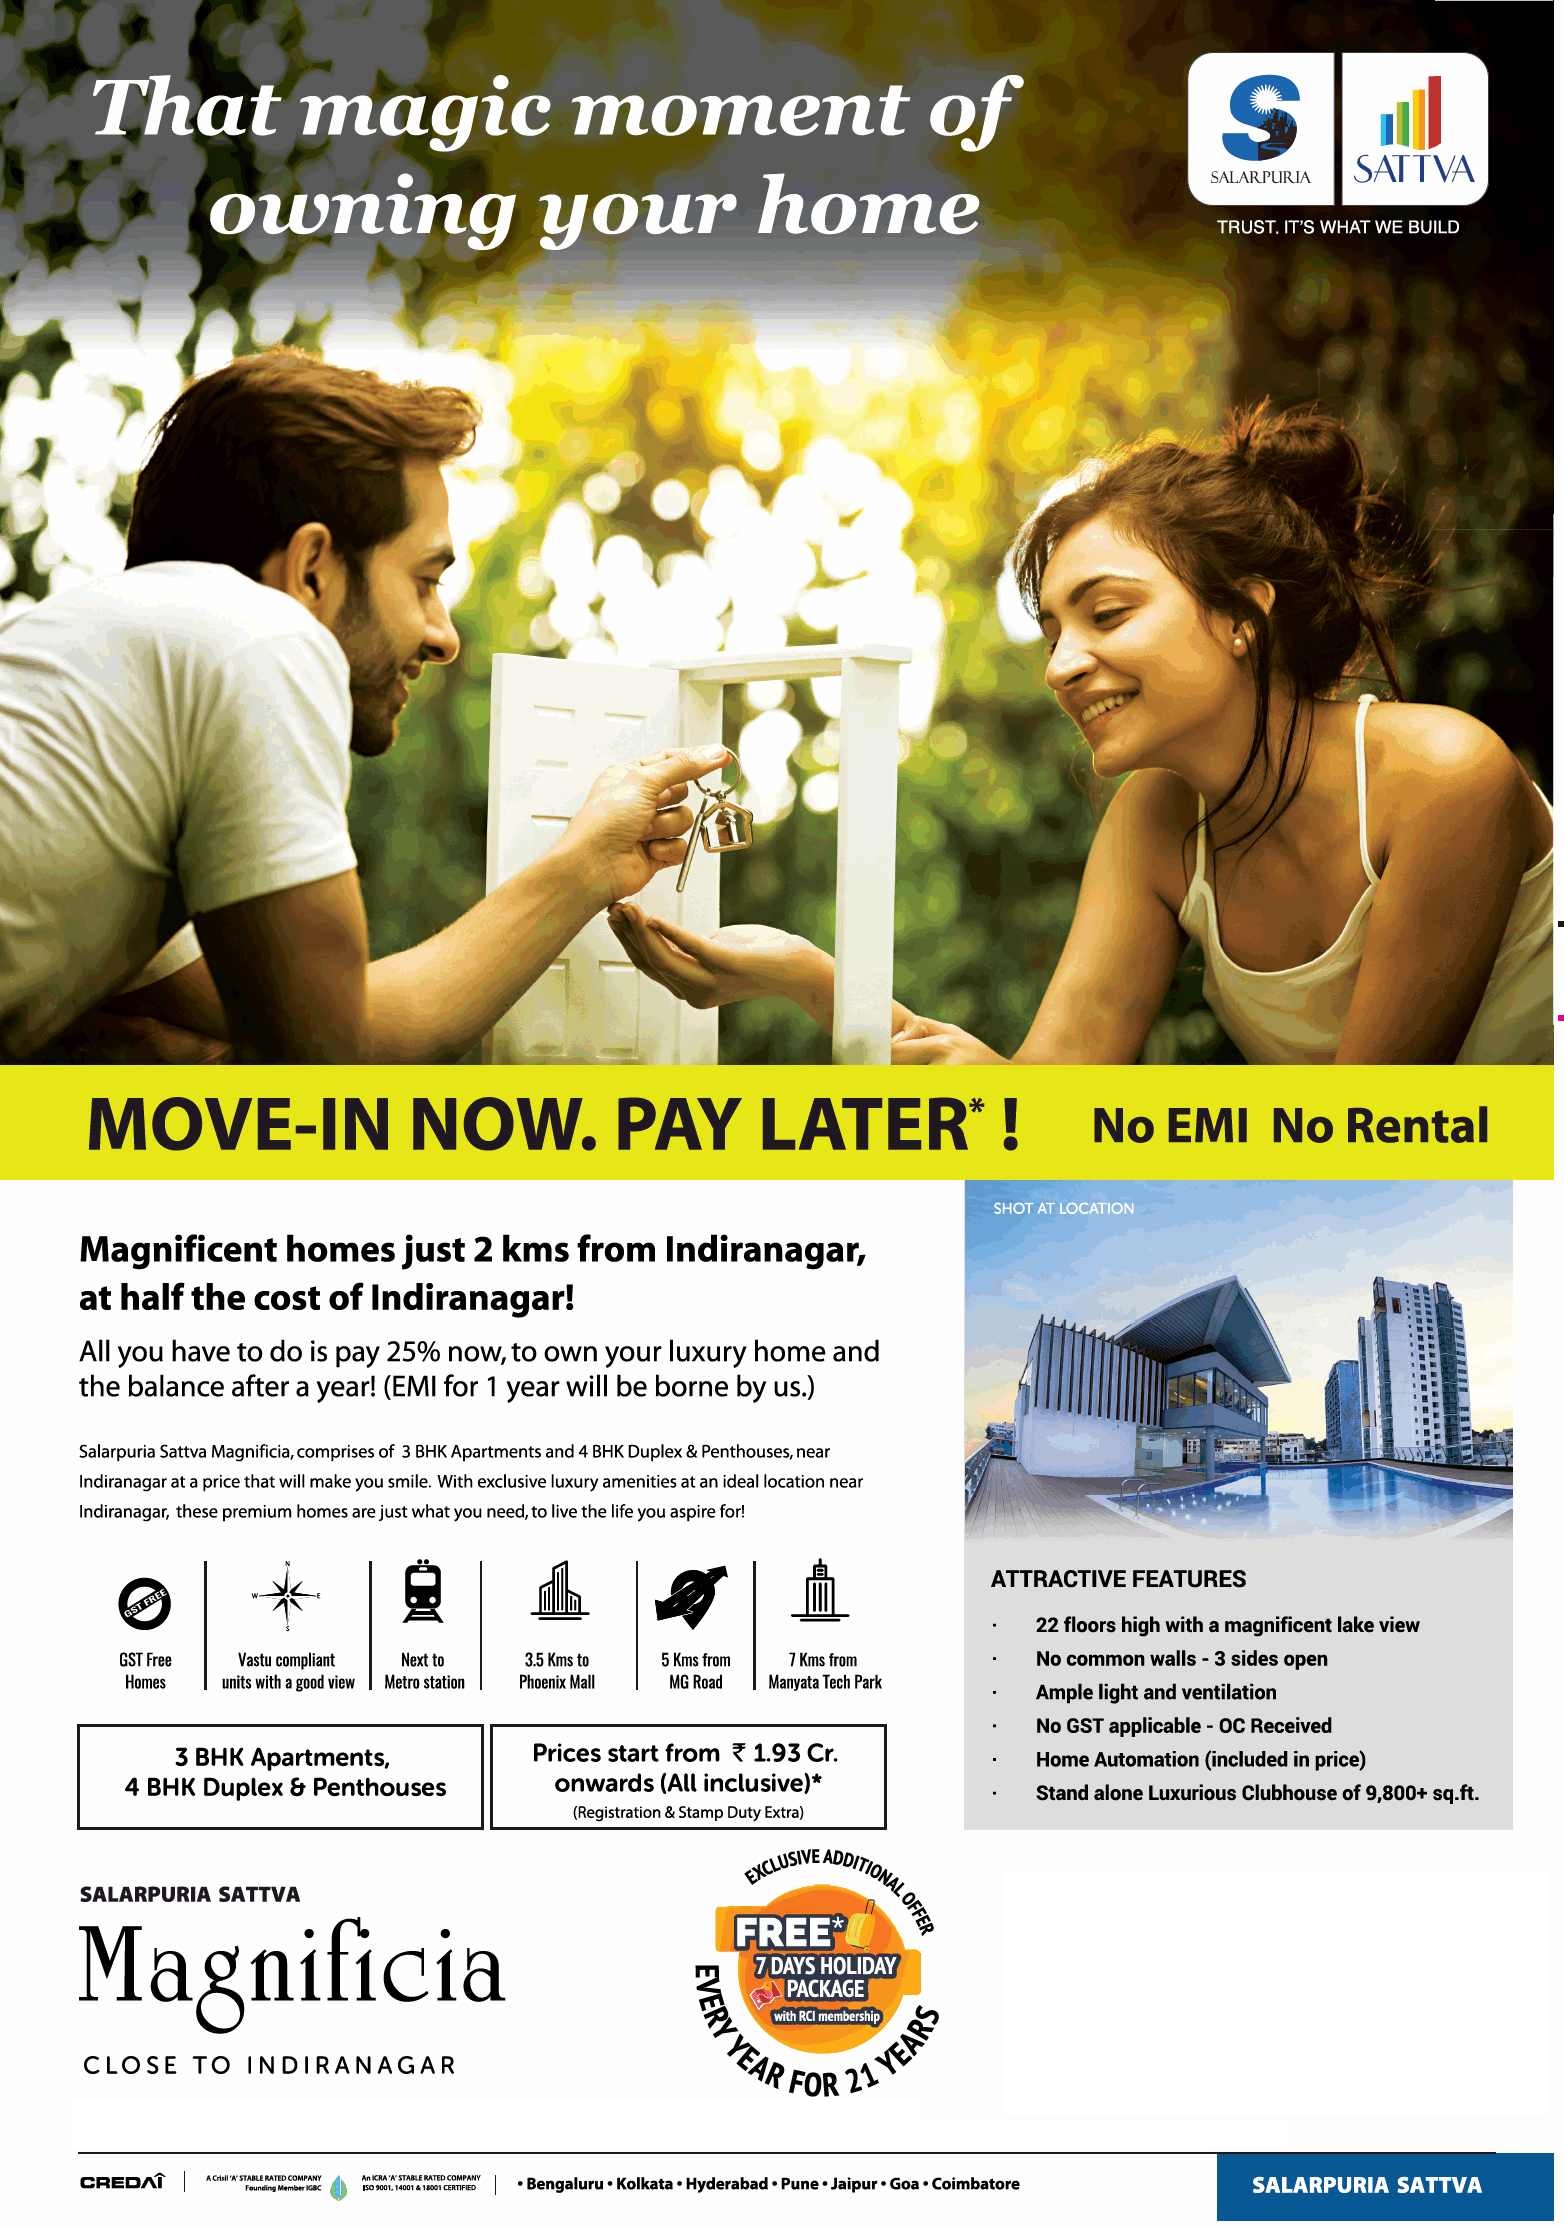 Move in now & pay later with no EMI & no rental at Salarpuria Sattva Magnificia in Bangalore